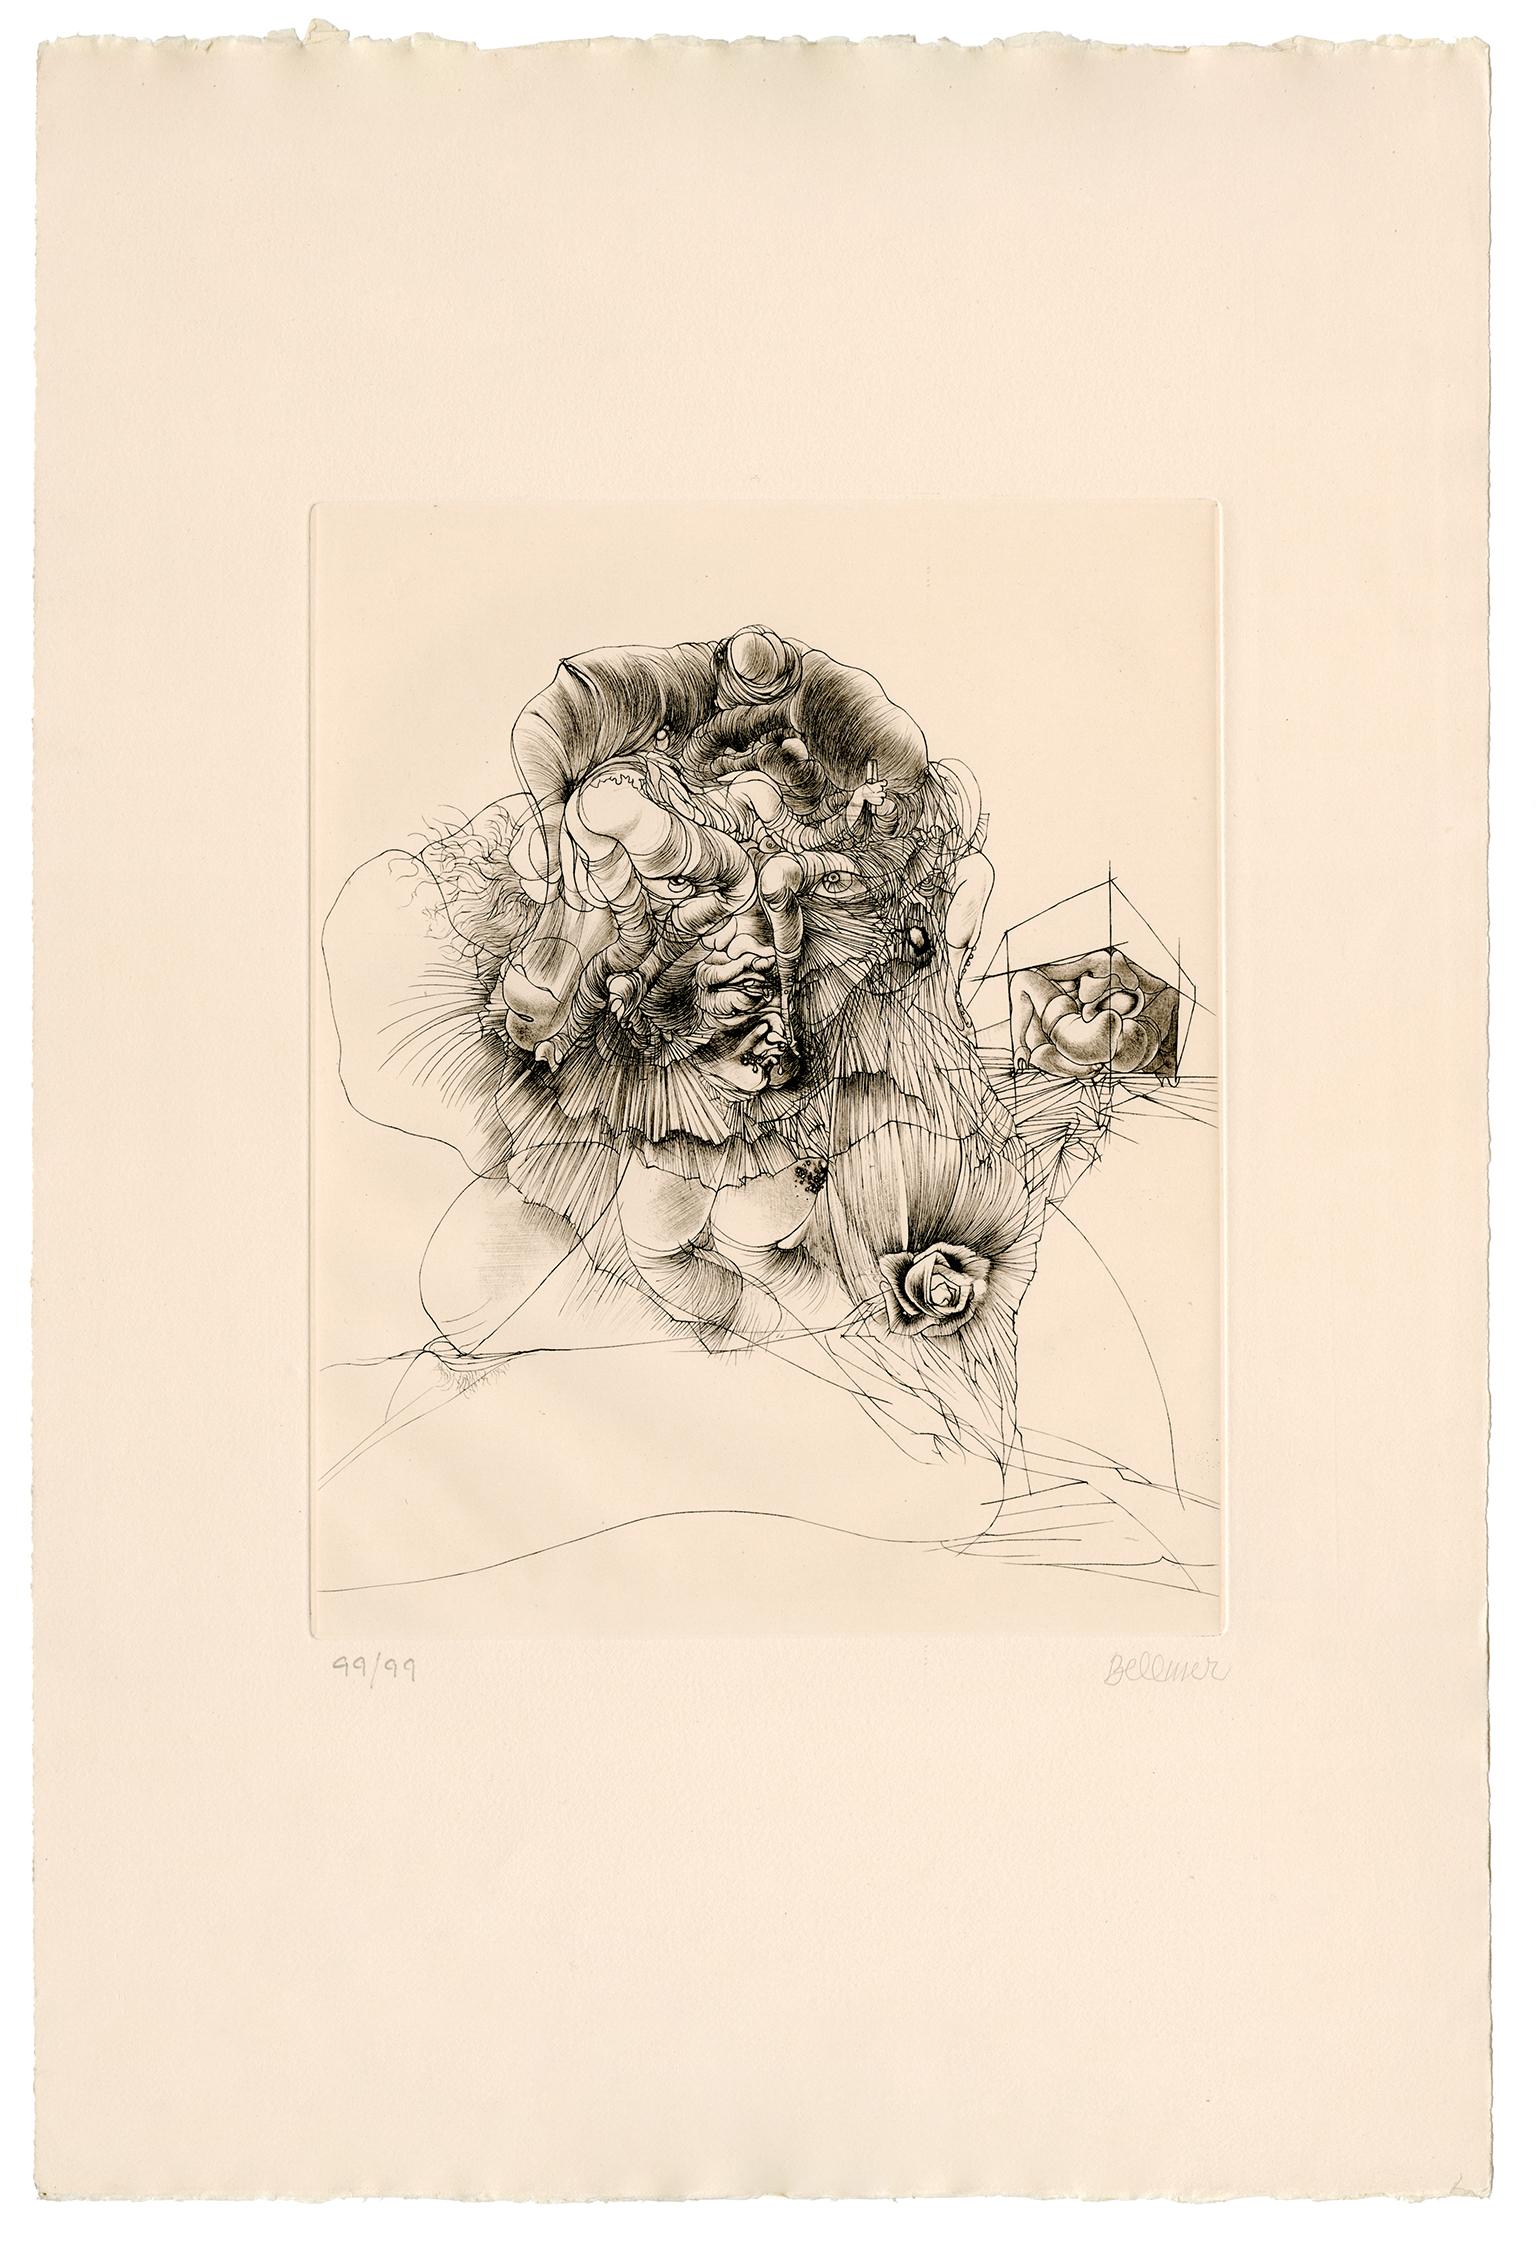 'The Modest Rose' — 1970s Erotic Surrealism - Print by Hans Bellmer